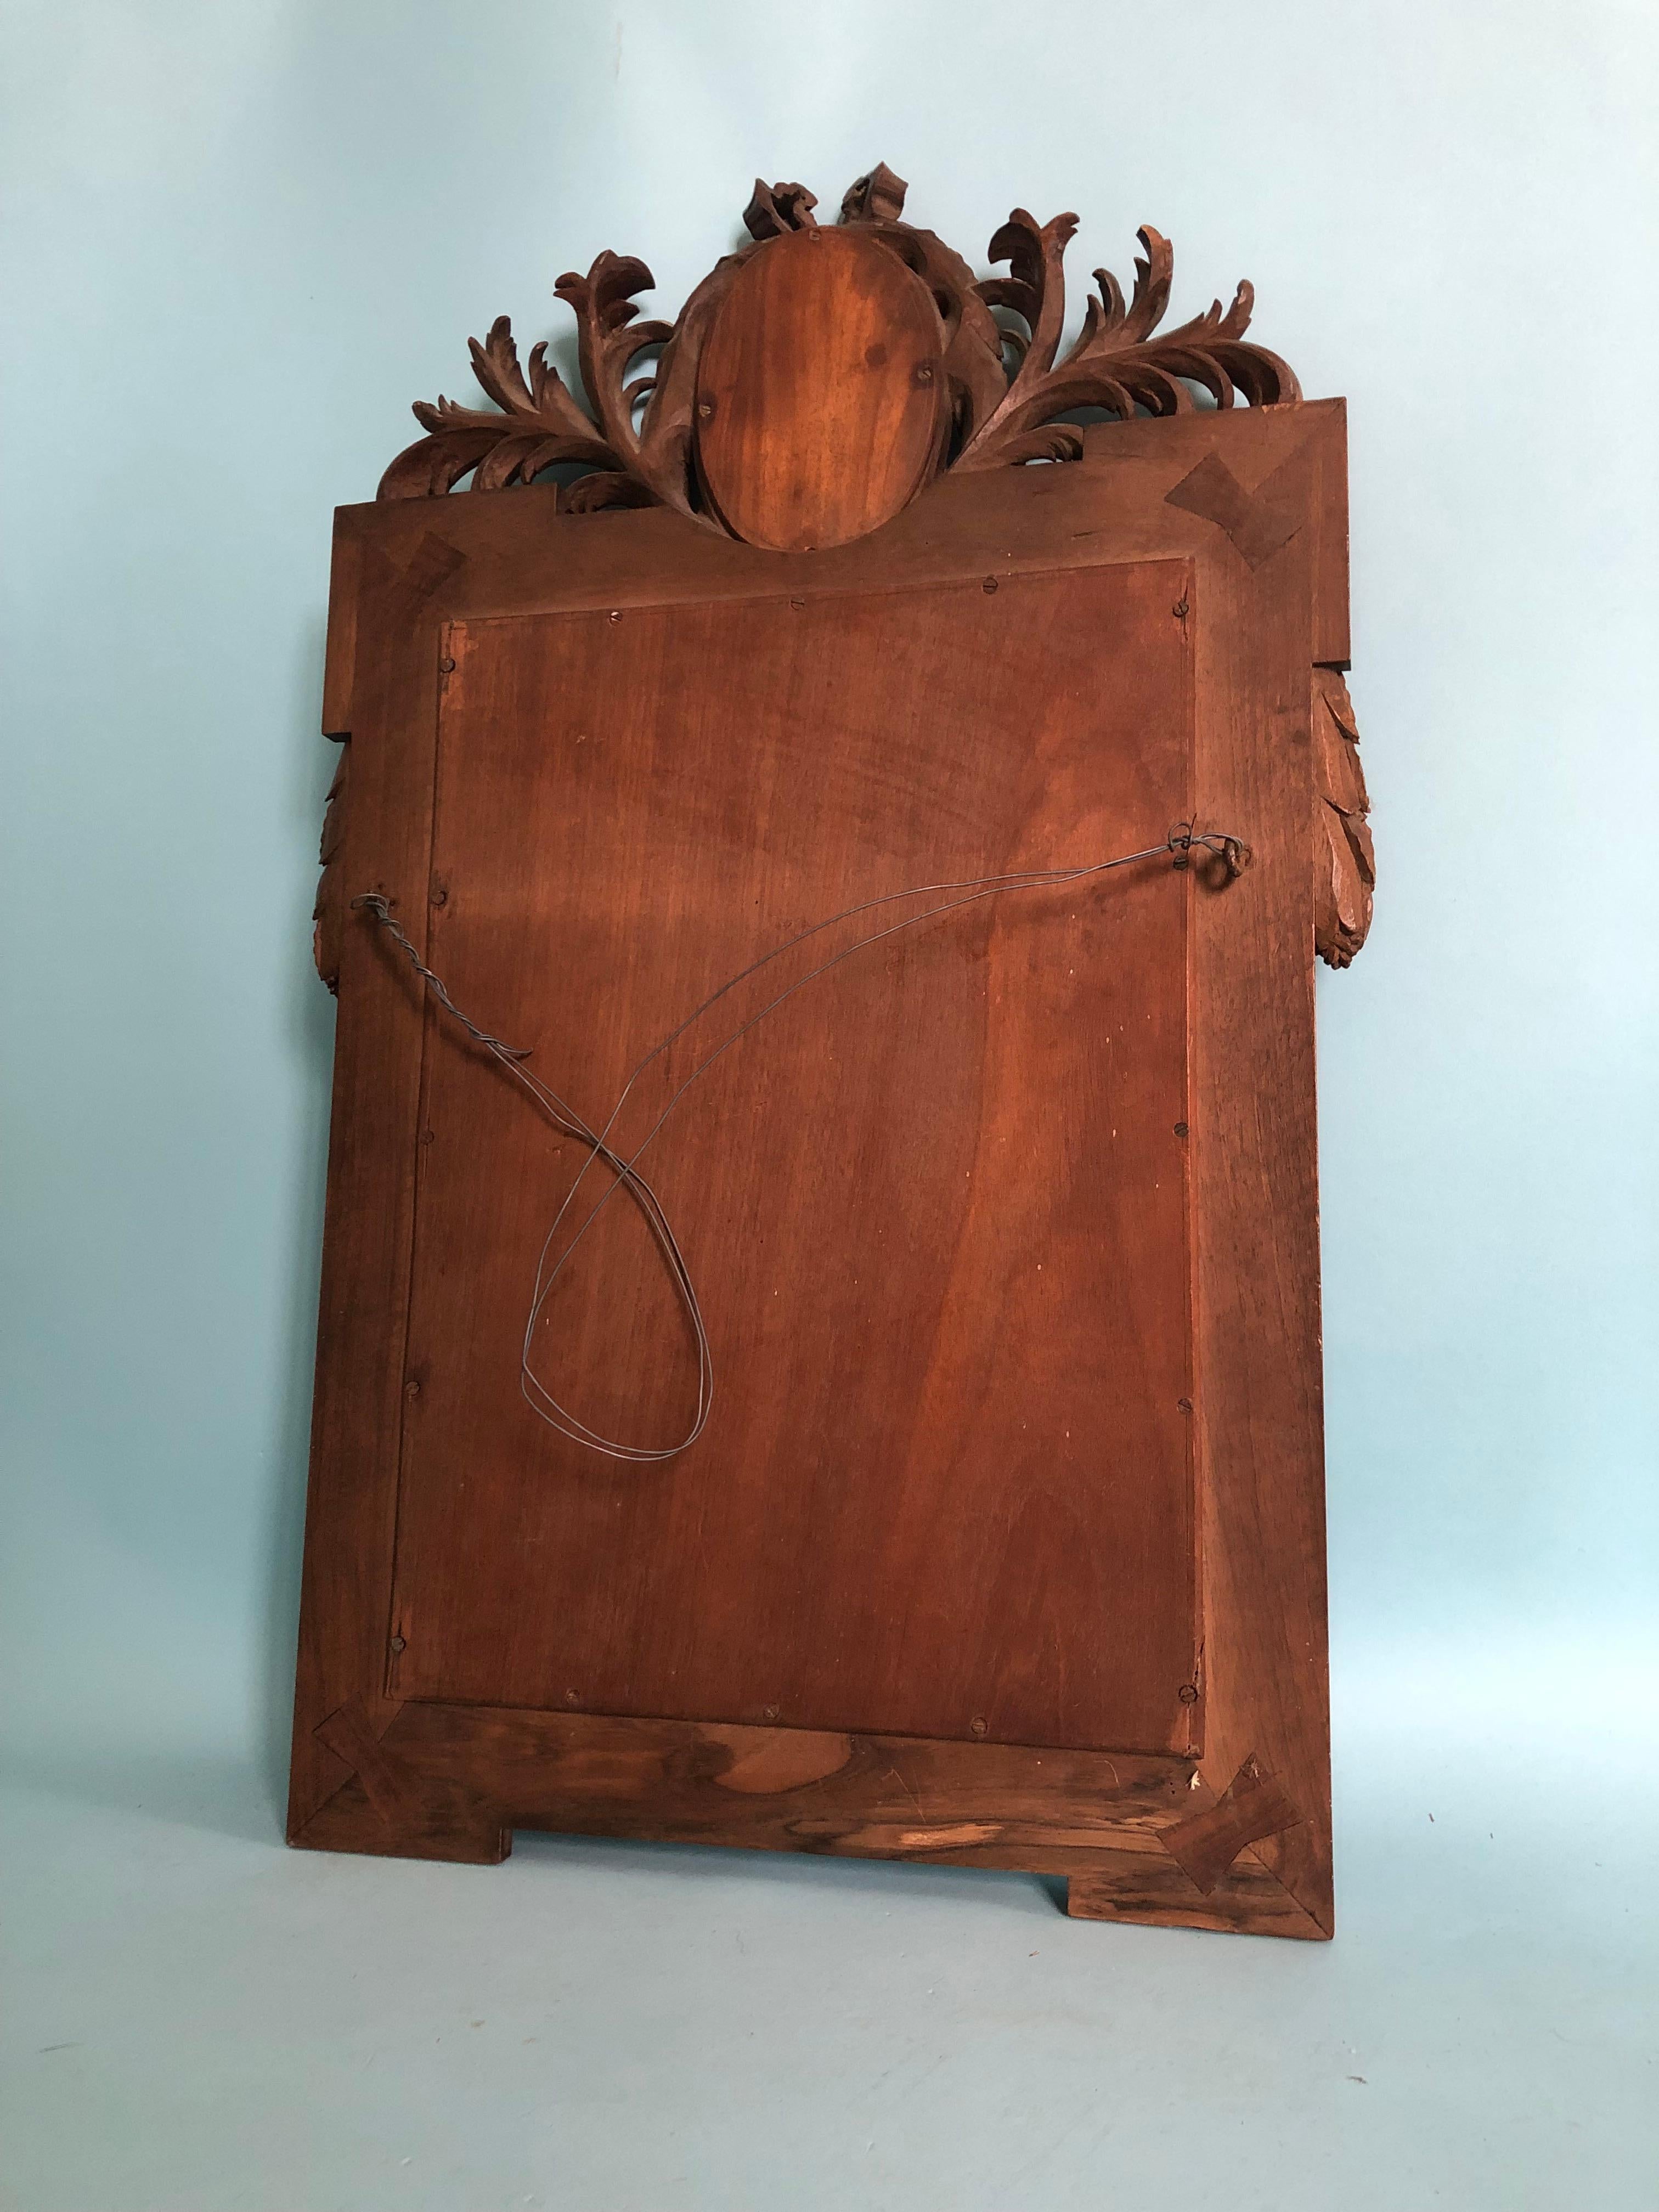 Richly Carved Mahogany Napoleon III Mirror Verre Eglomise Late 19th Century For Sale 2